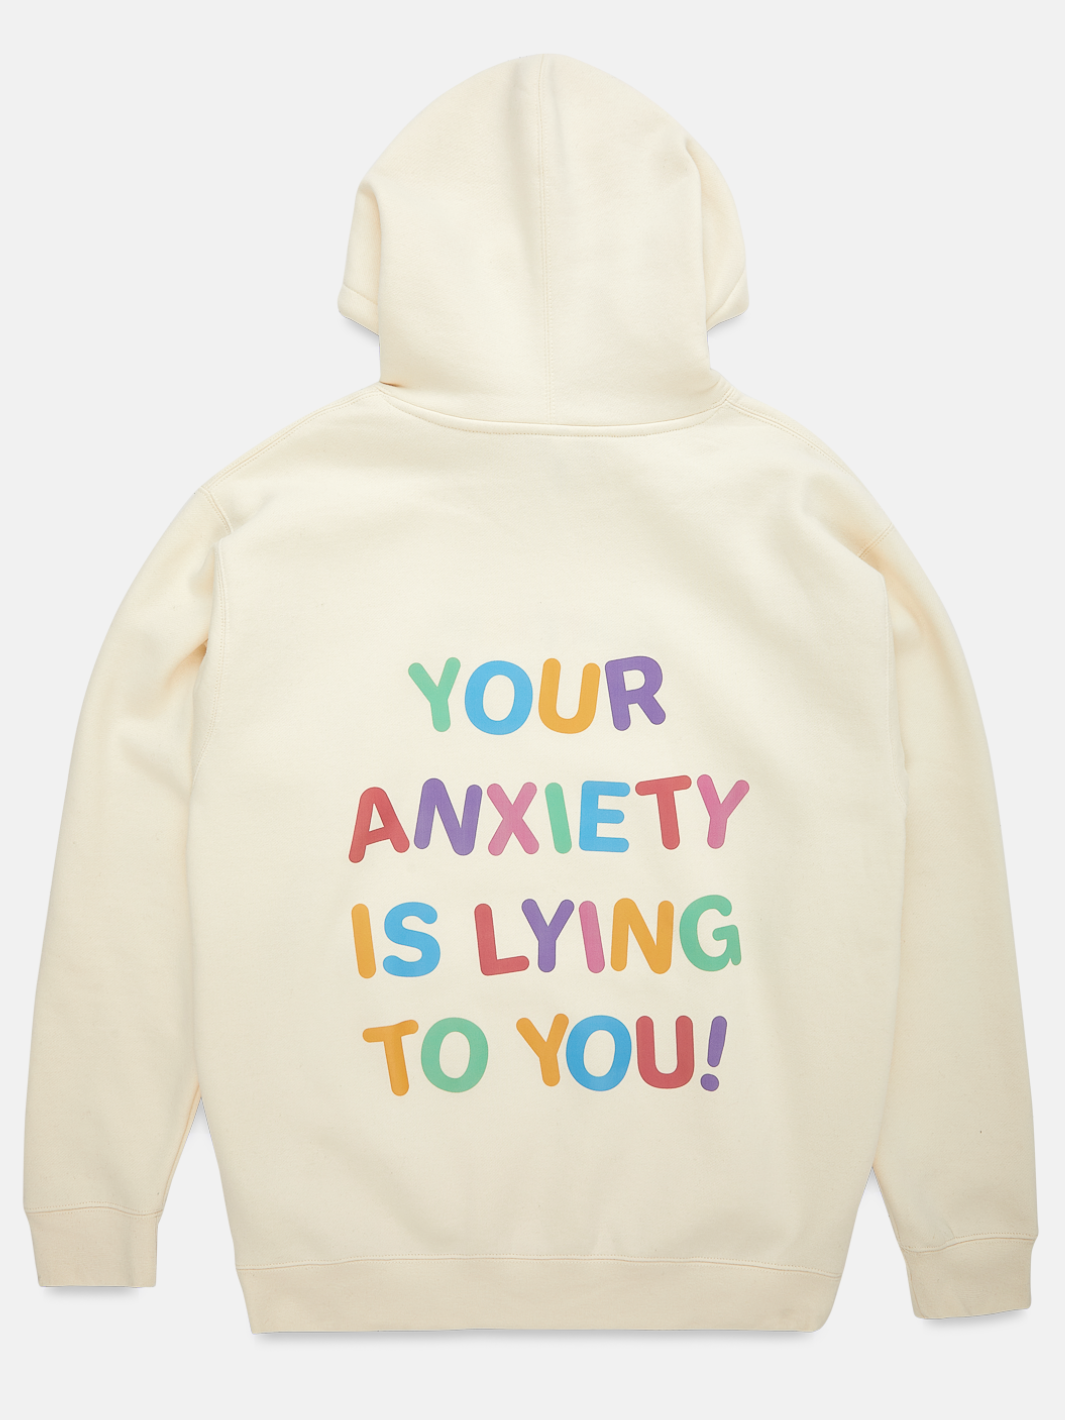 "Your Anxiety Is Lying" Hoodie